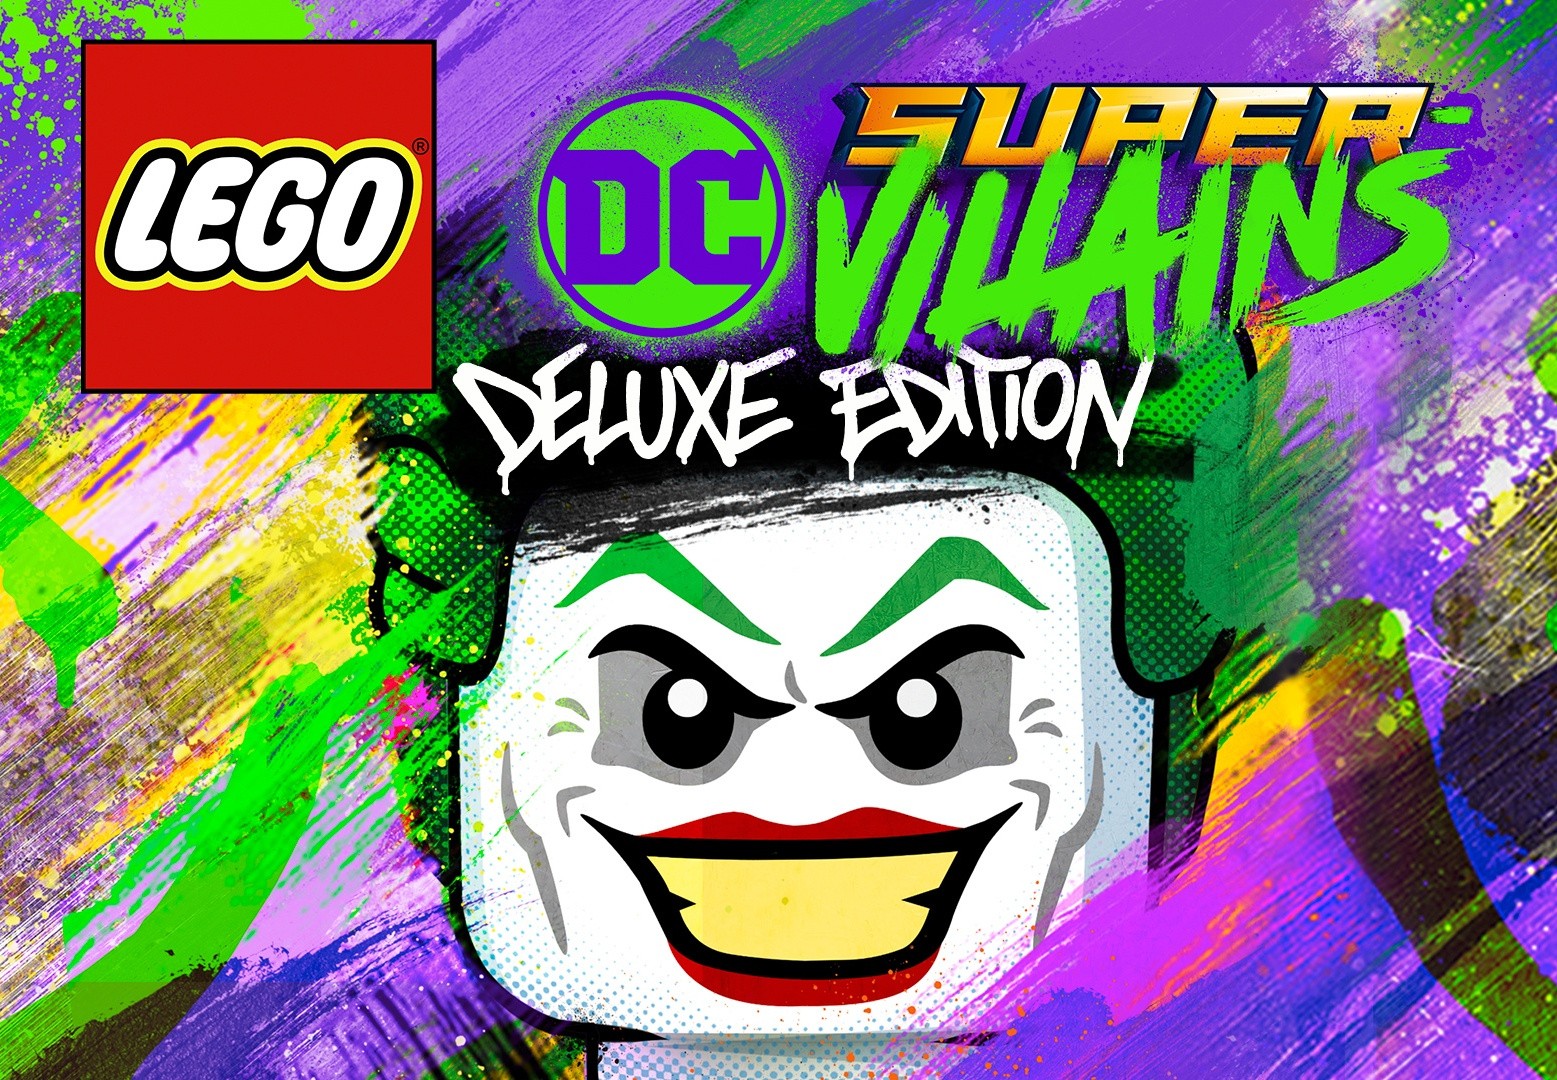 LEGO DC Super-Villains Deluxe Edition US XBOX One CD Key